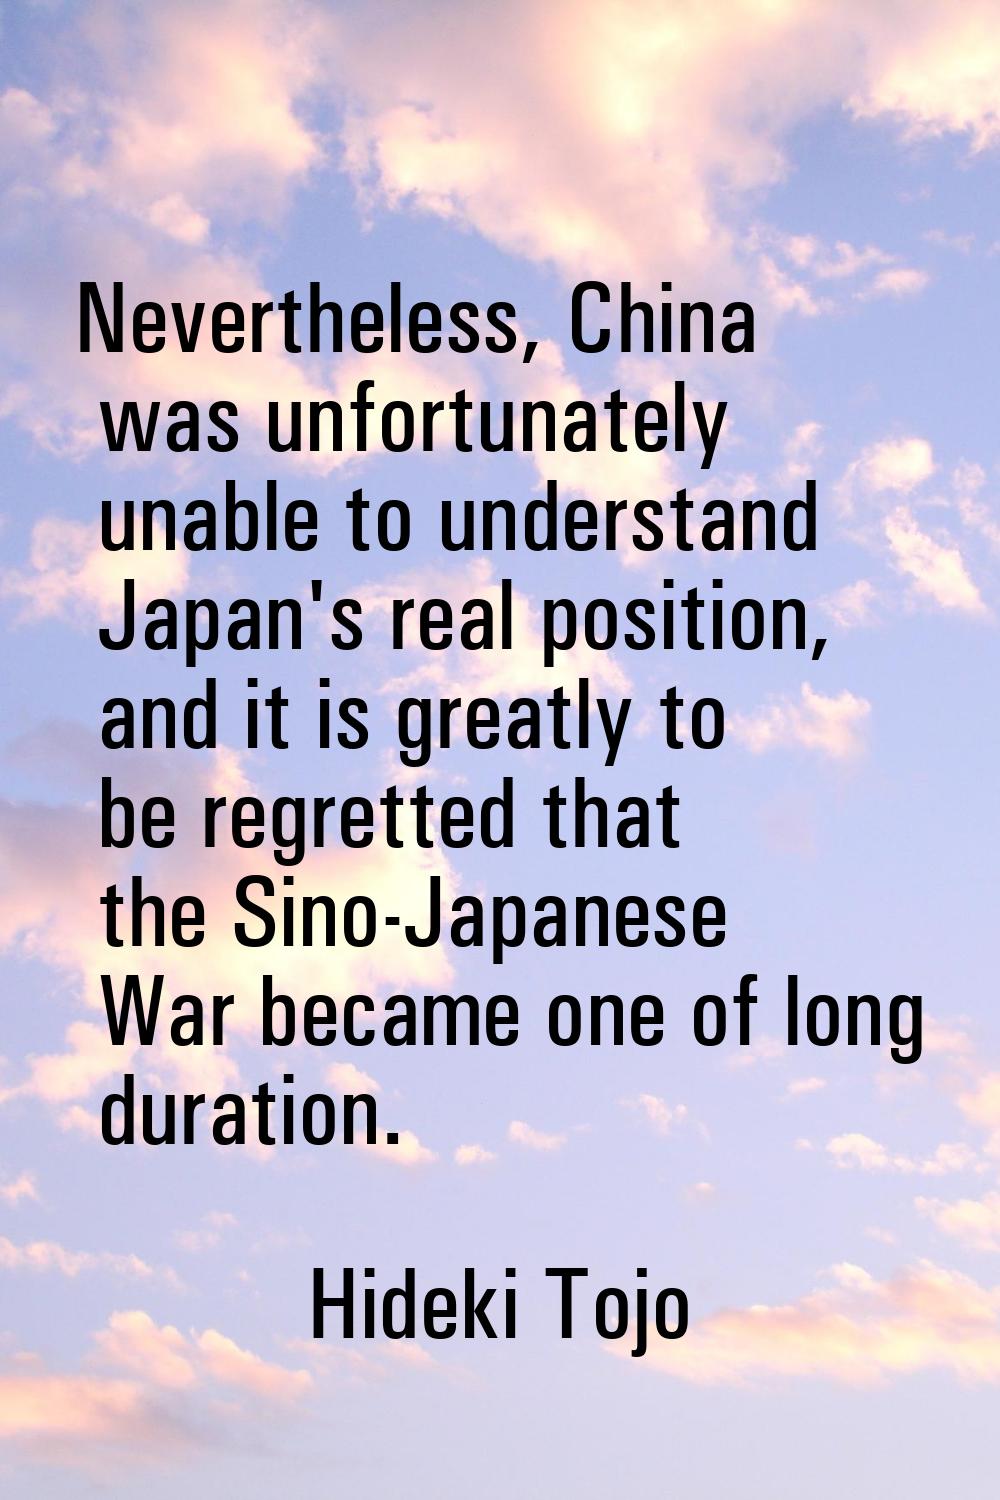 Nevertheless, China was unfortunately unable to understand Japan's real position, and it is greatly